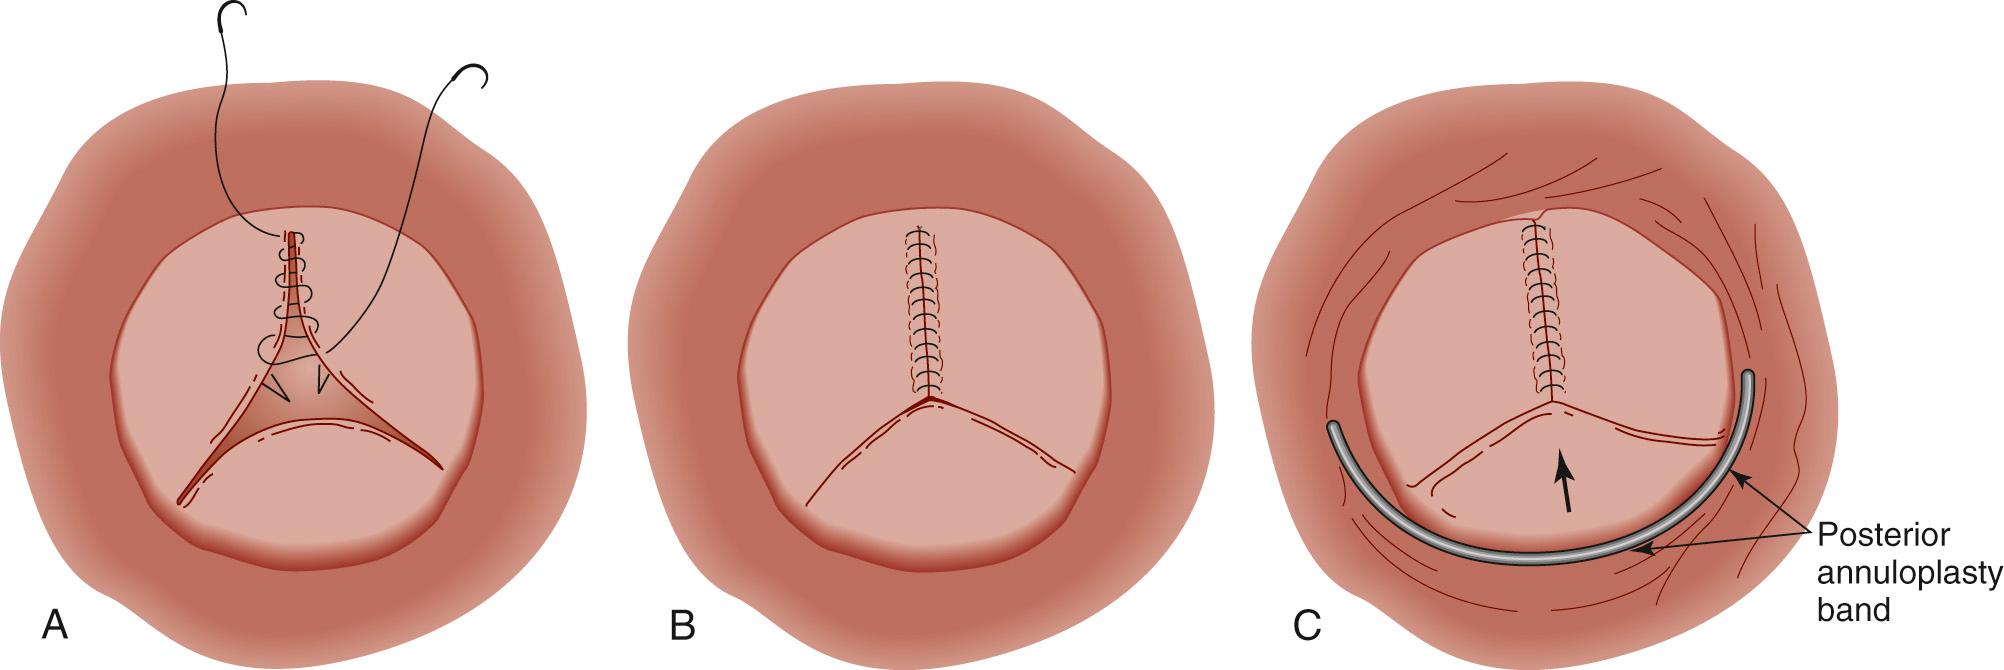 FIGURE 116-7, Closure of the left atrioventricular (AV) valve cleft. Once the leaflets are attached to the ventricular septal defect and atrial septal defect patches, the zone of apposition of the superior and inferior bridging leaflets is usually well aligned. The cleft is then closed in two layers. A, The first layer is a running mattress suture, apposing the edges of the leaflets. B, The second running simple suture line ensures apposition of the leaflet edges. C, When there is significant annular dilation, a posterior annuloplasty is performed by inserting a flexible partial ring from the anterior fibrous continuity with the aortic valve to just posterior to the interatrial septum. The latter should remain 3 to 4 mm posterior to the junction between atrial septum and AV valve annulus to avoid injury to conduction tissue.